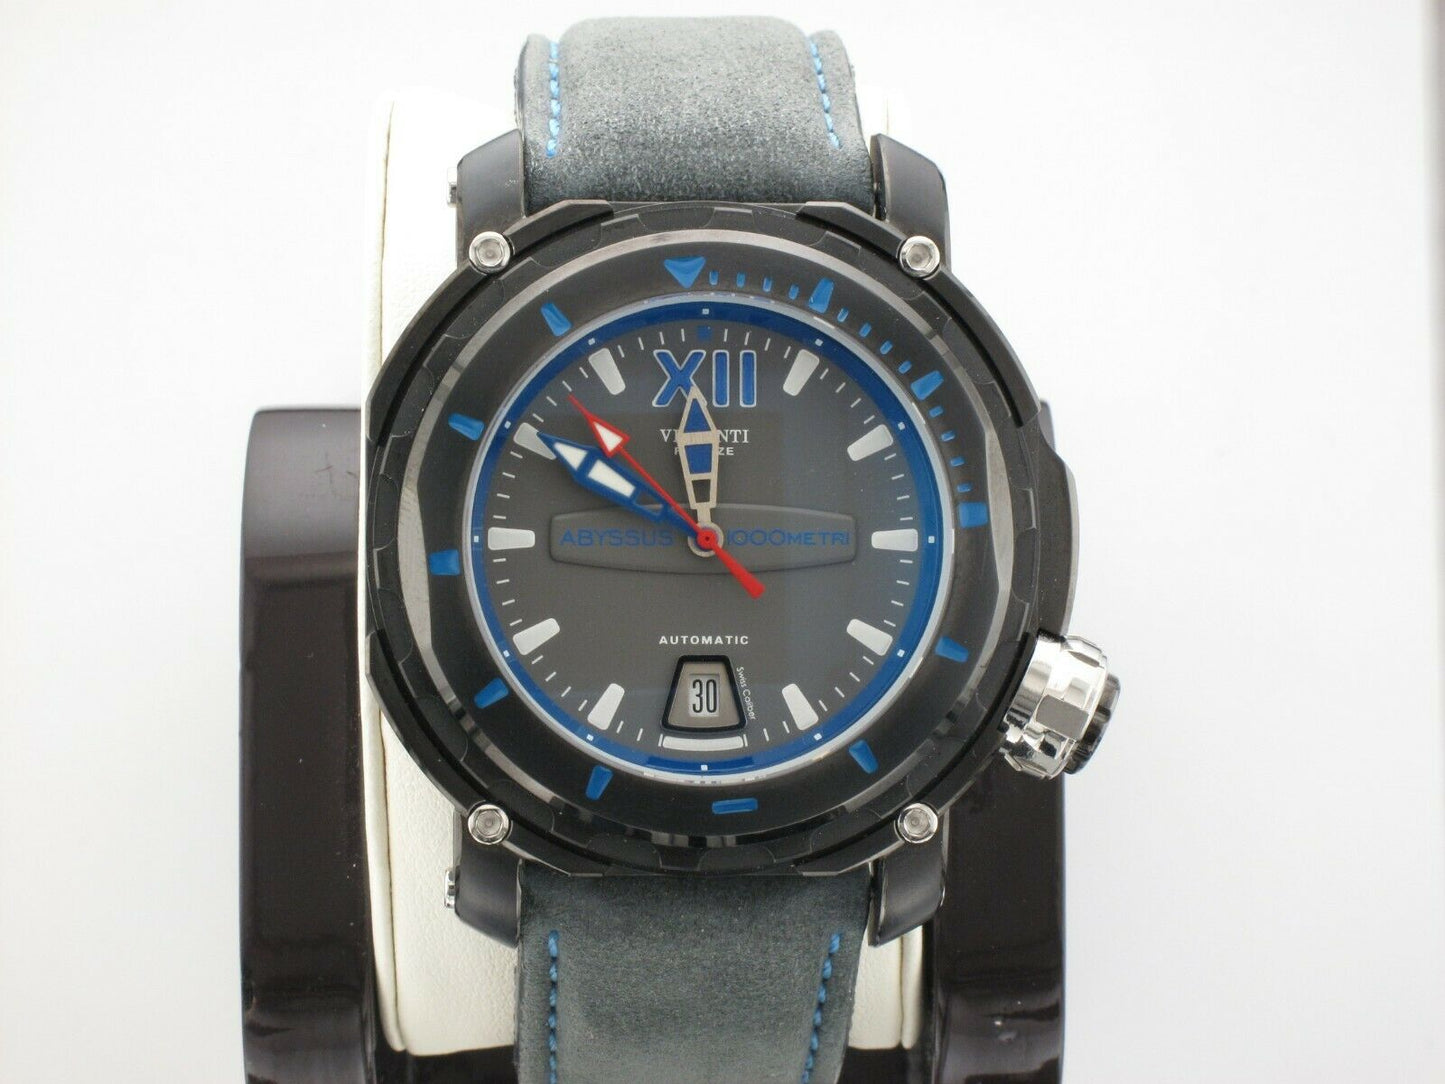 VISCONTI FULL DIVE ABYSSUS ELECTRO BLUE WATCH